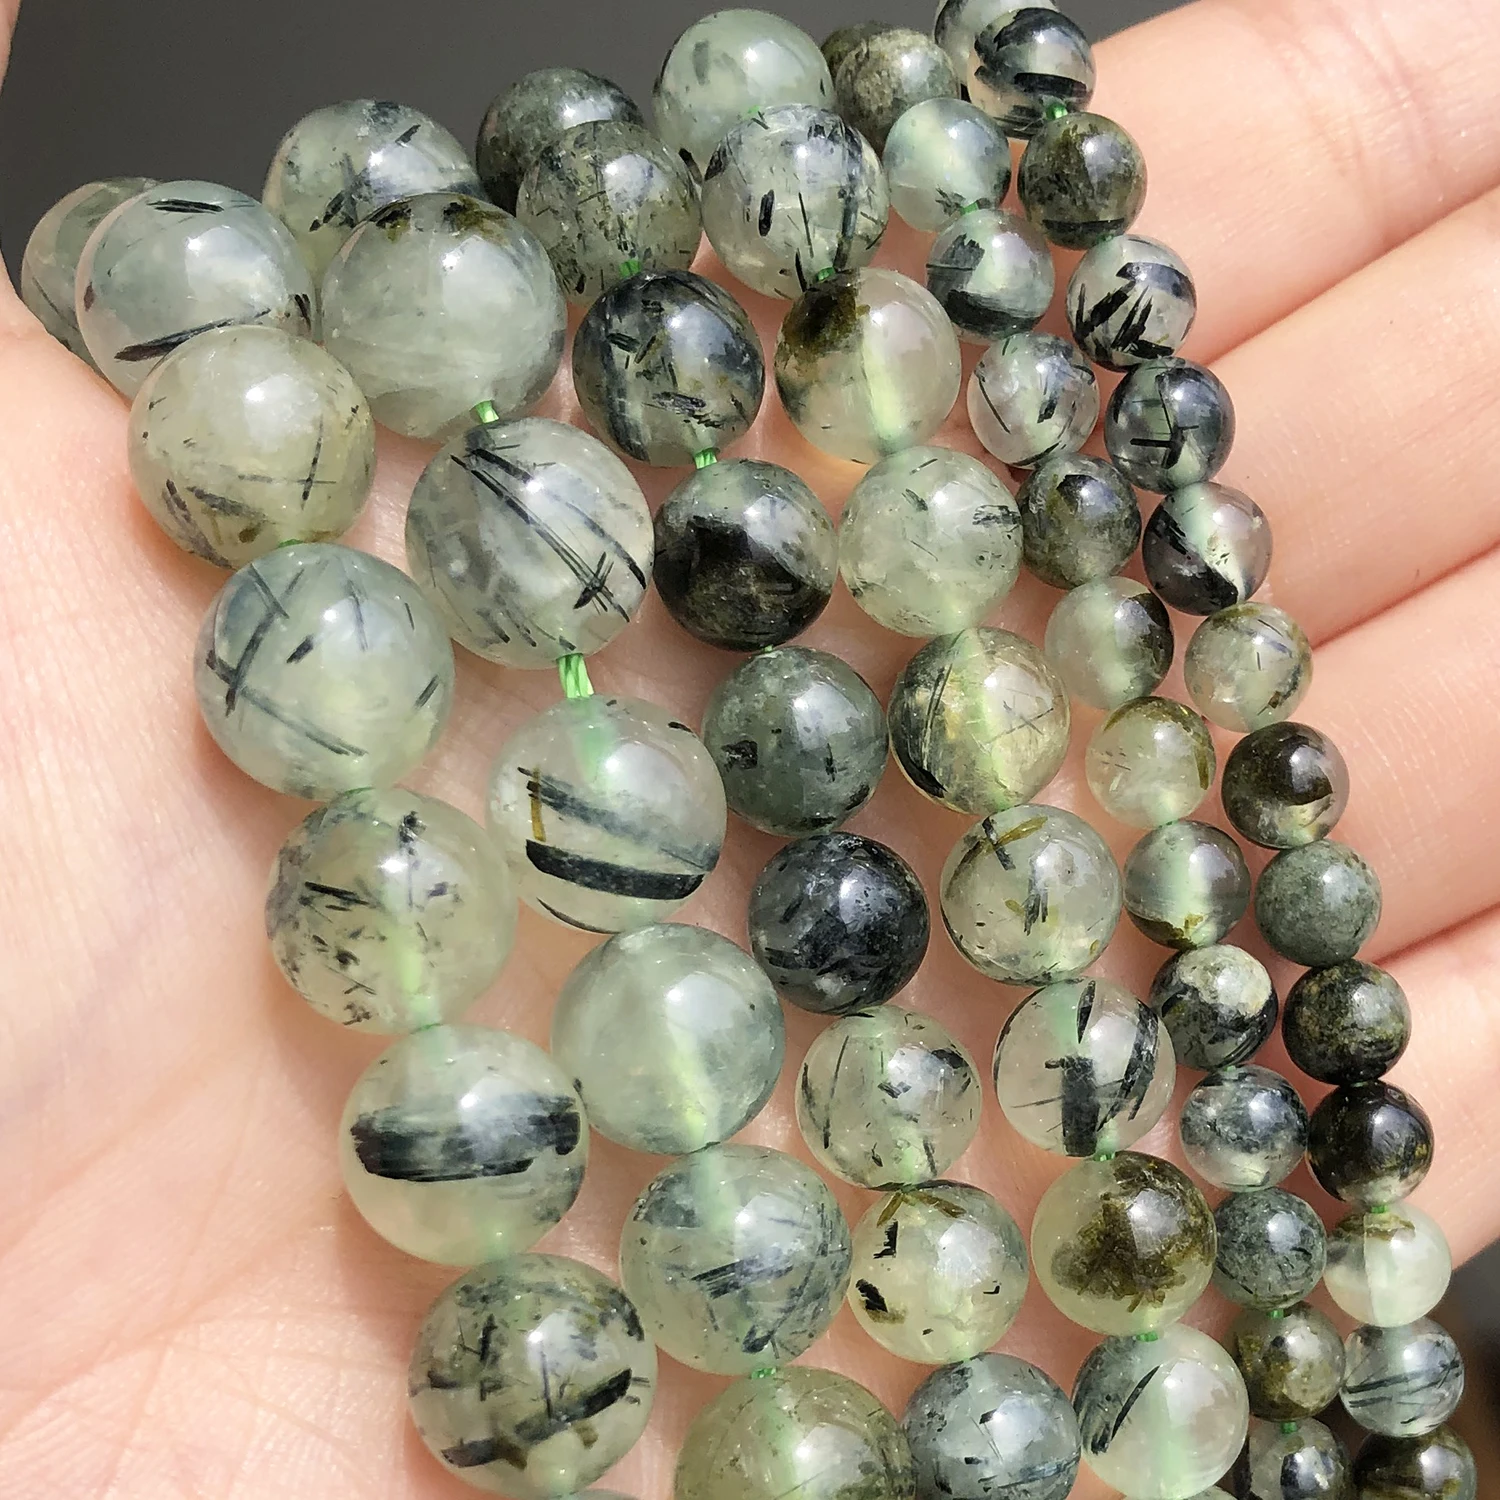 

6 8 10mm Green Prehnites Jades Stone Round Loose Spacer Minerals Beads for Jewelry Making DIY Bracelet Accessories 15''Inches